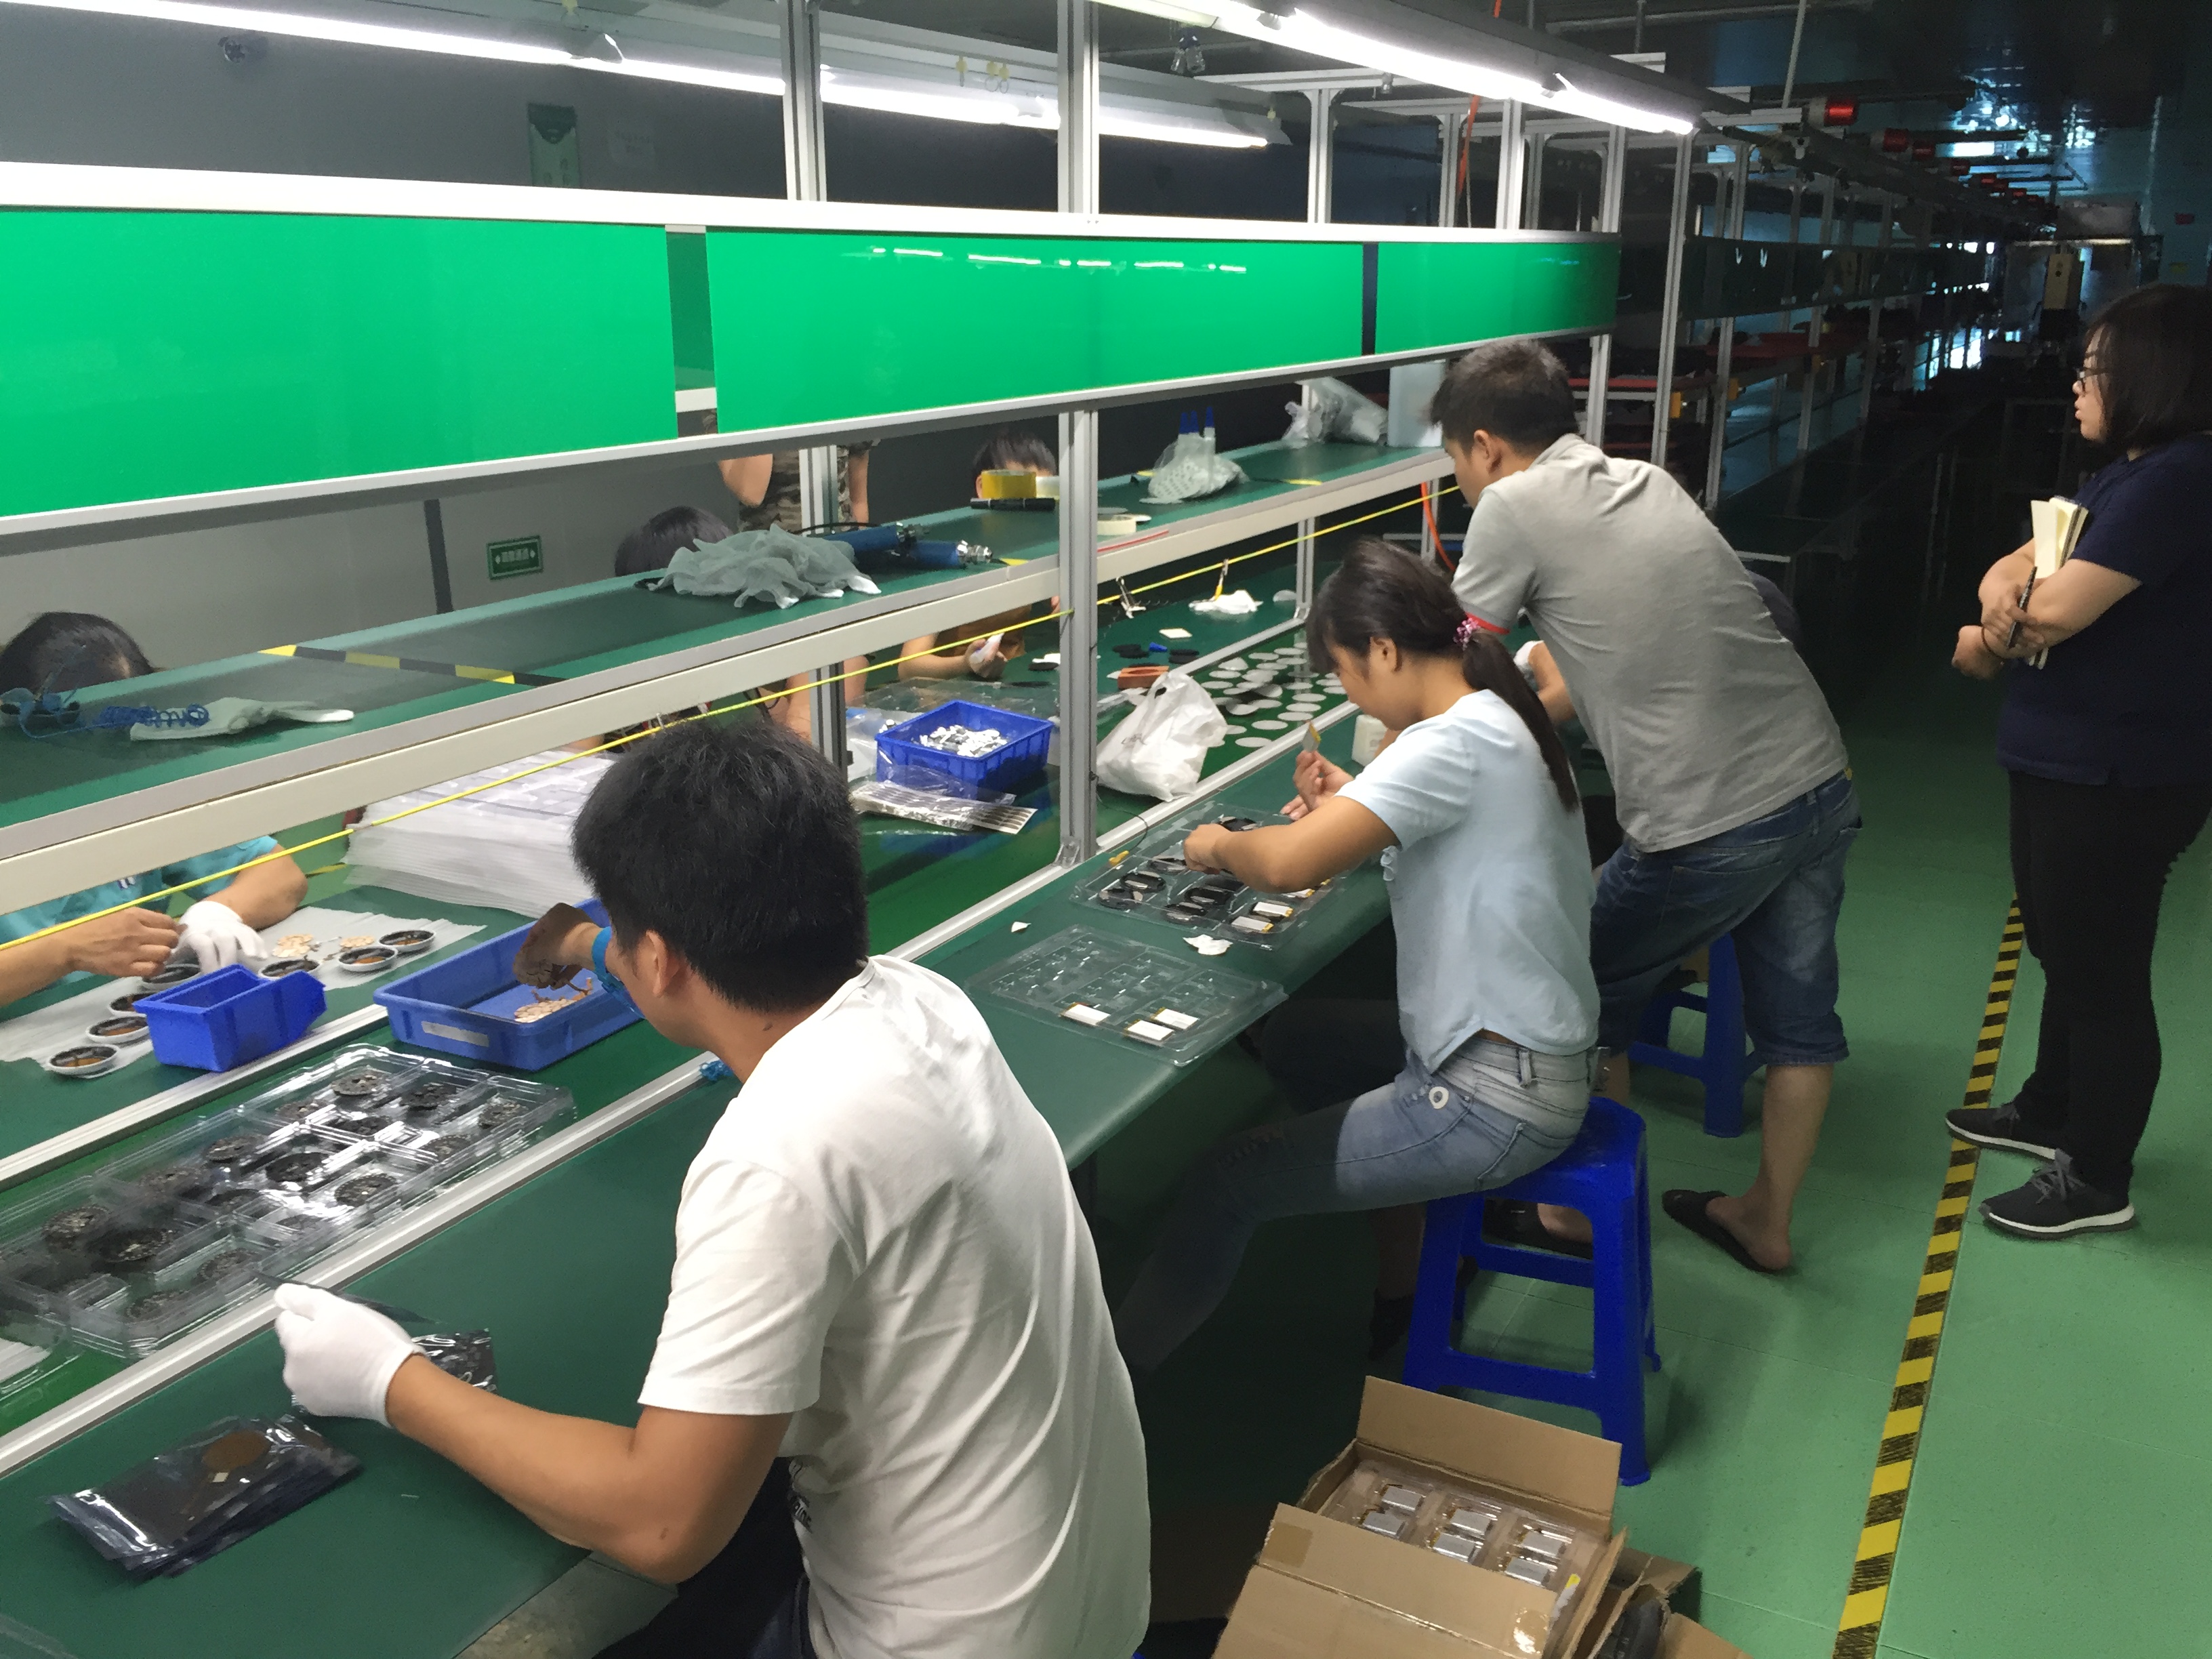 Saent hardware assembly line, view 1 (2016)